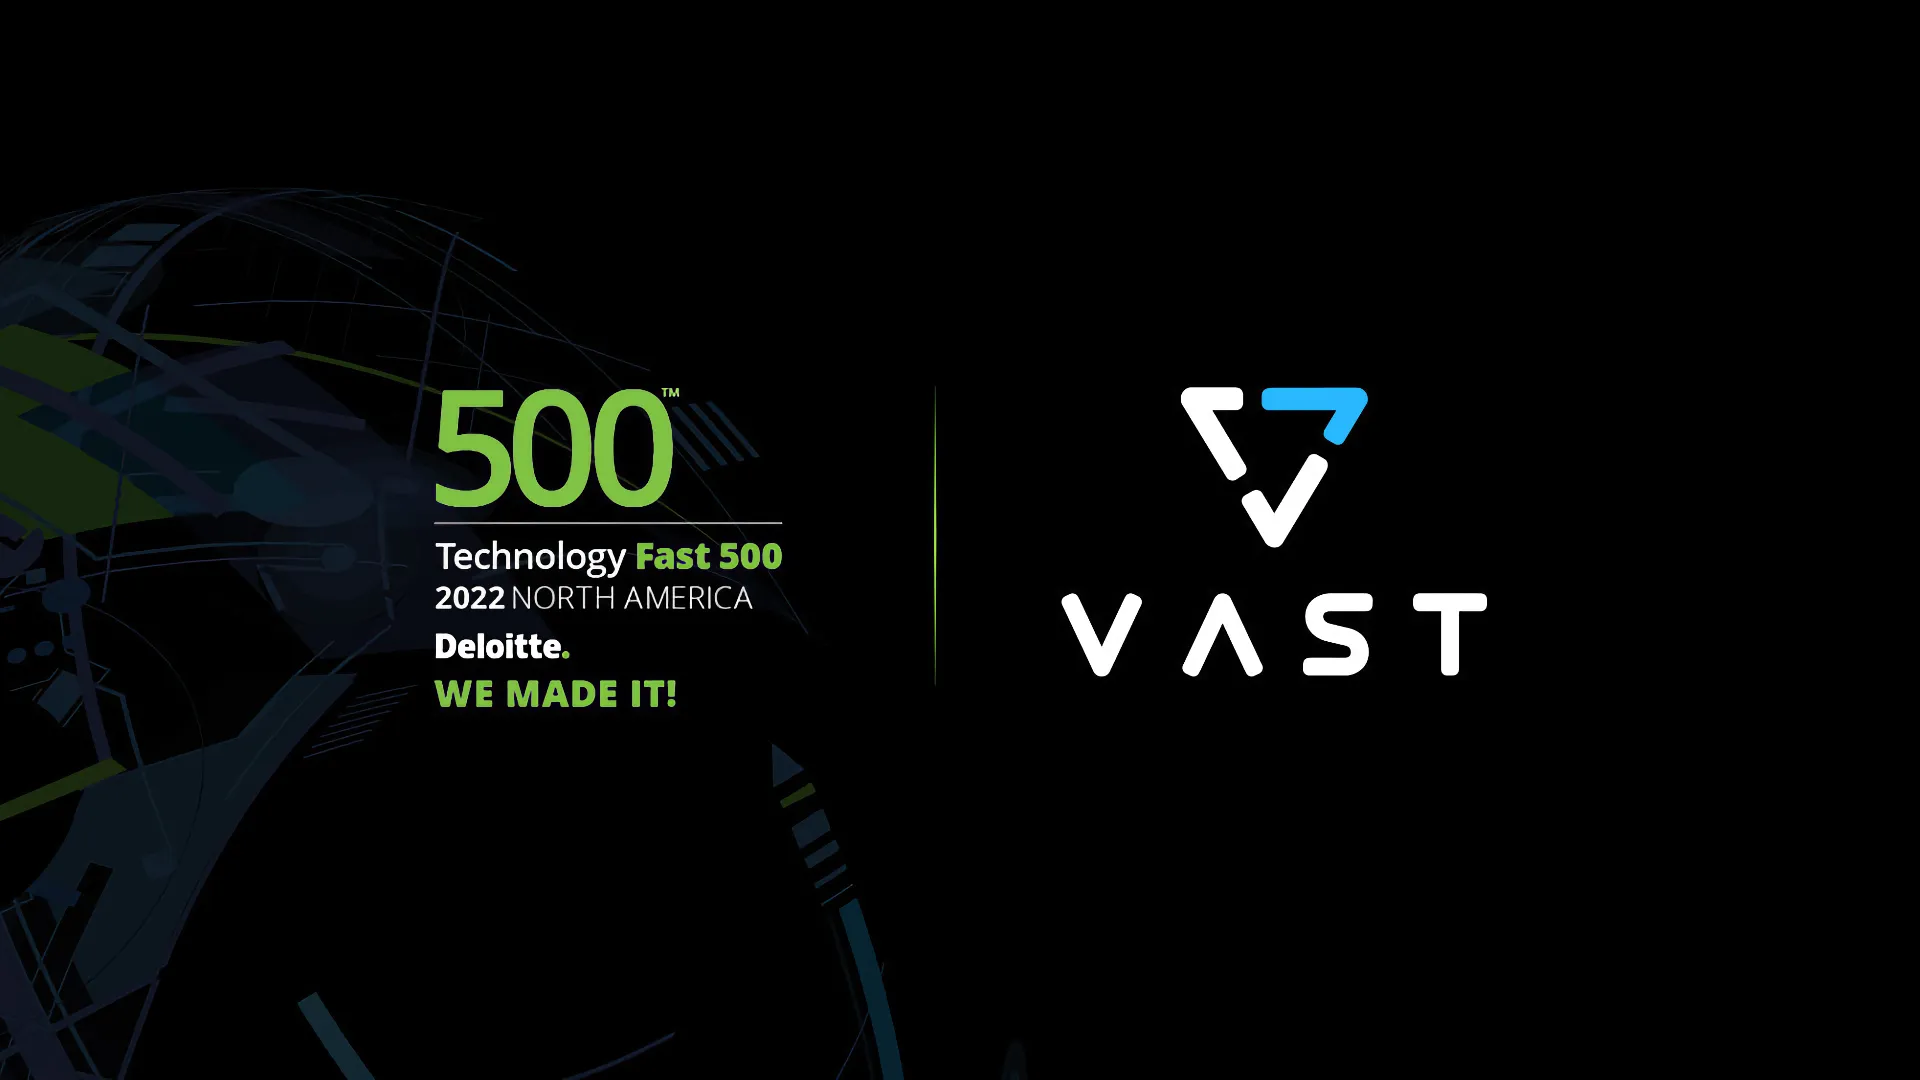 VAST Data Ranked 5th Among North America’s Fastest-Growing Technology Companies